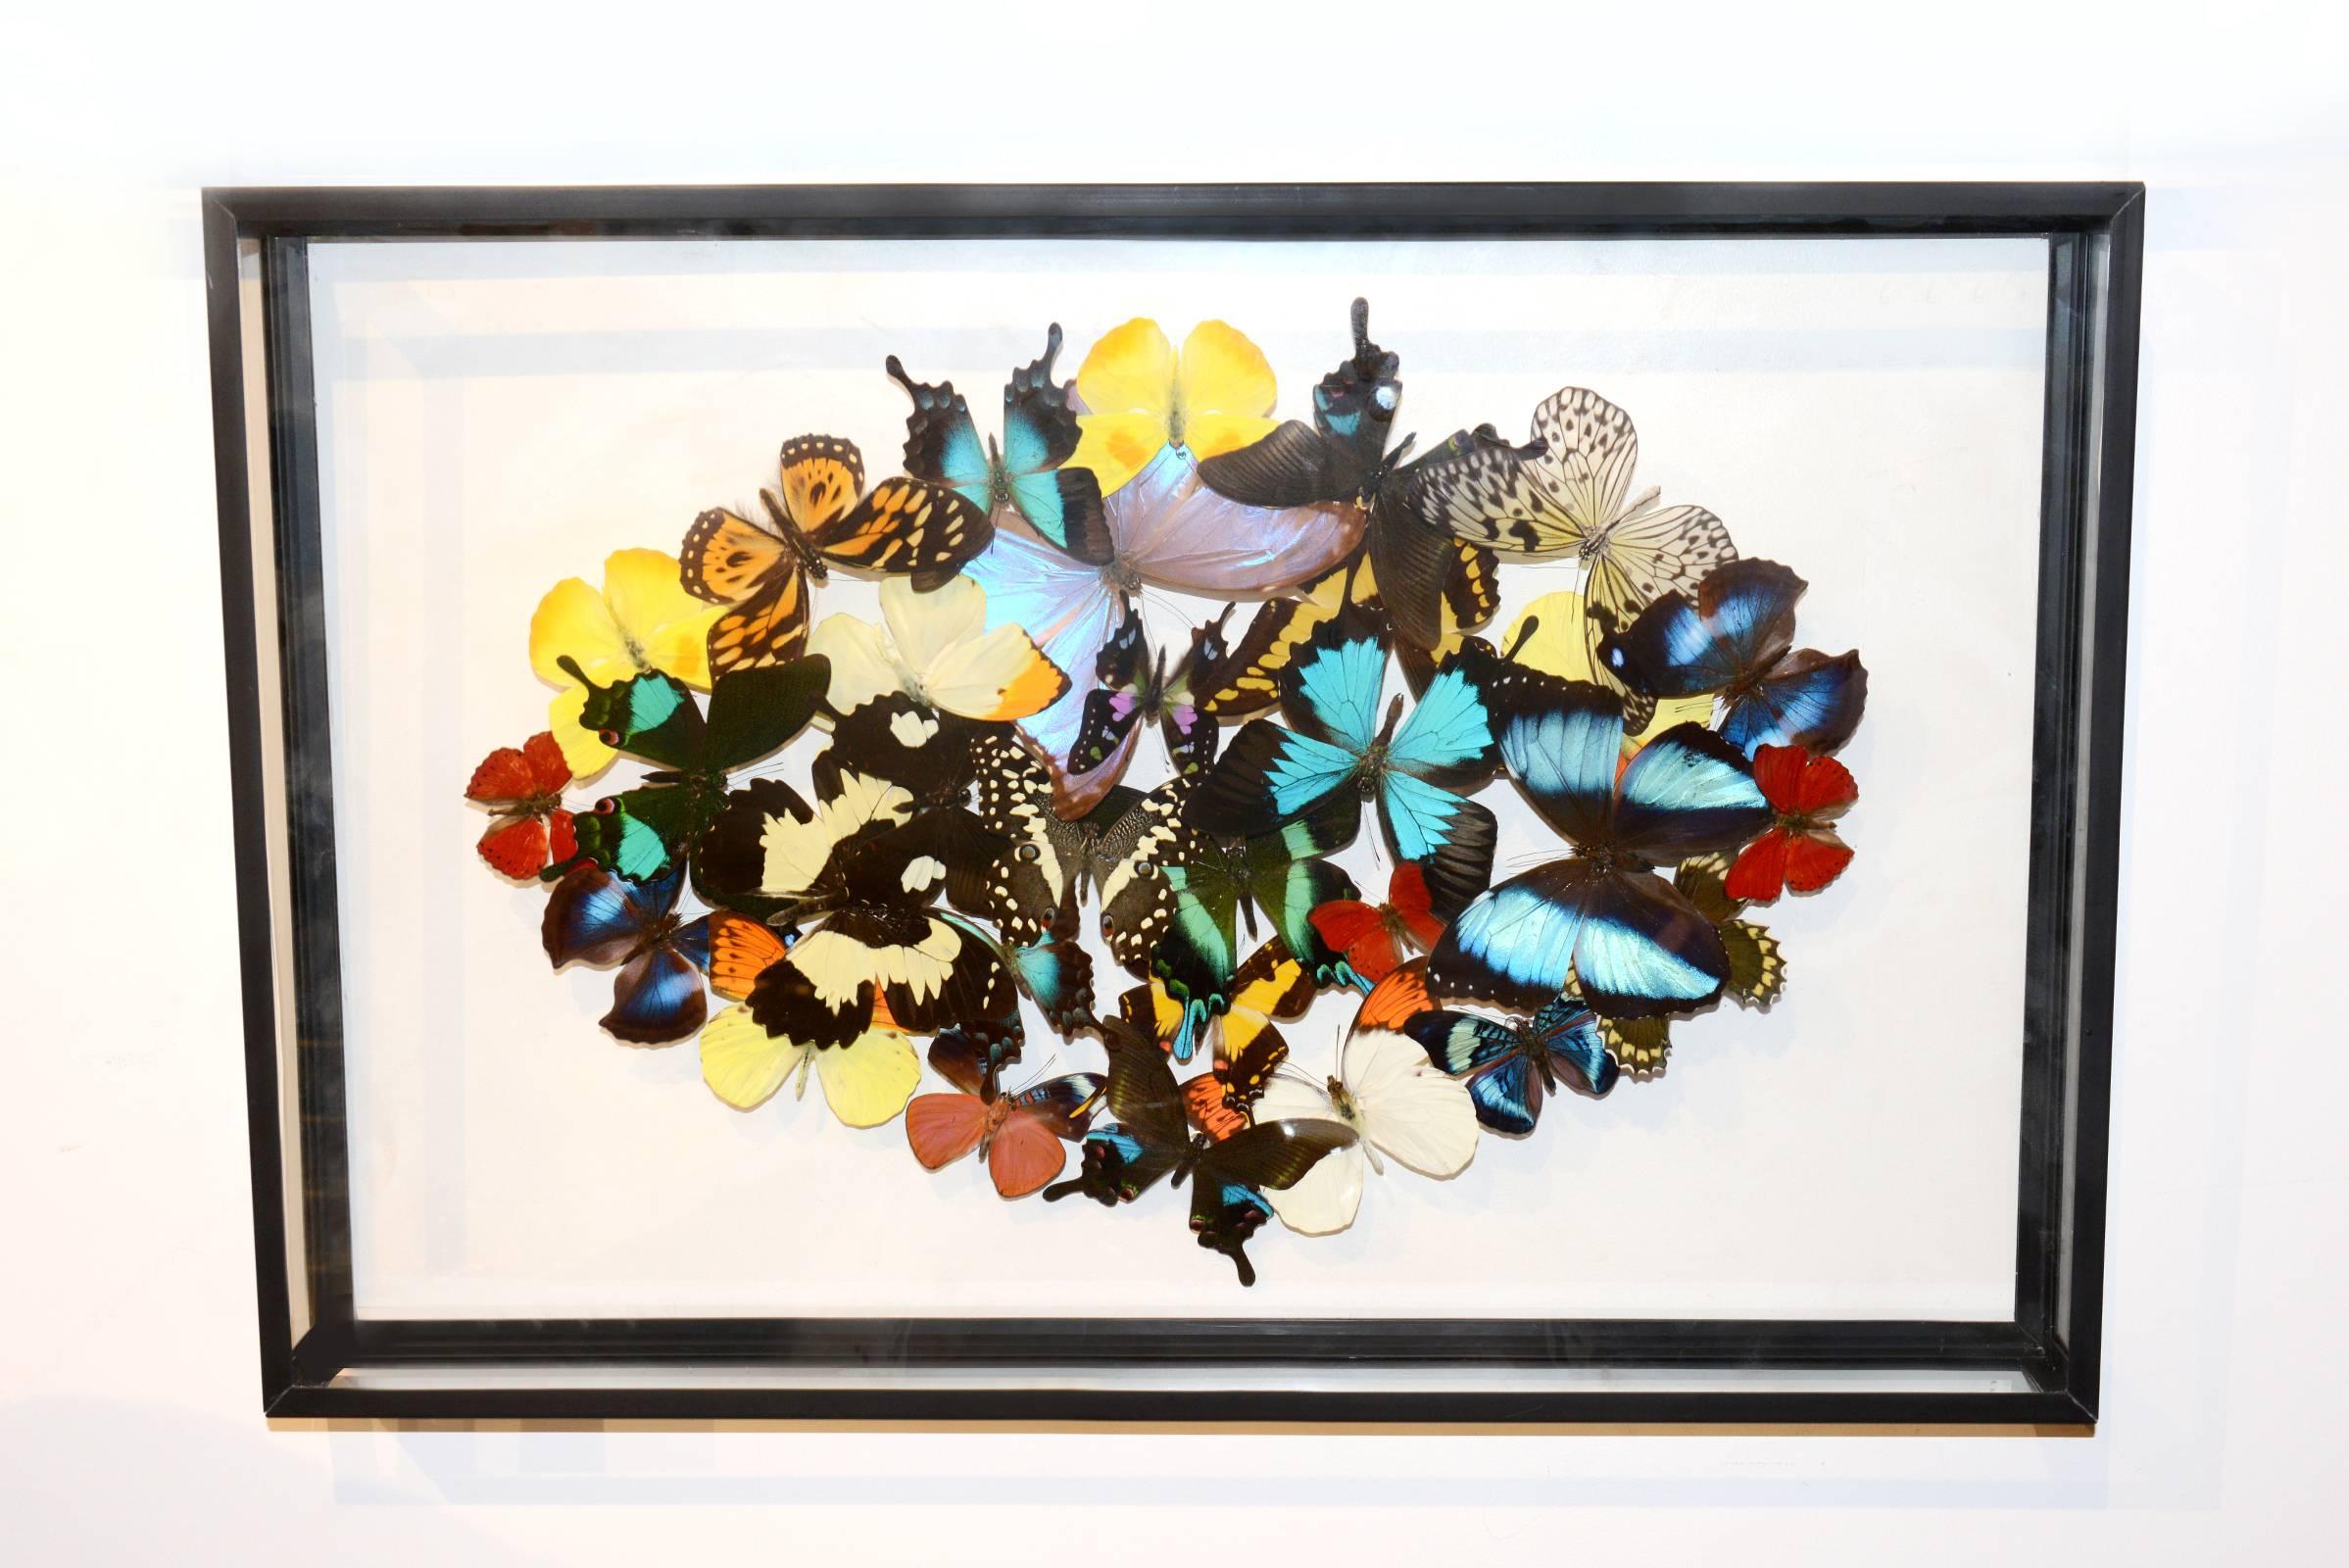 Rare butterflies multicolors under rectangular glass frame,
wall decoration, exceptional piece made in France.
